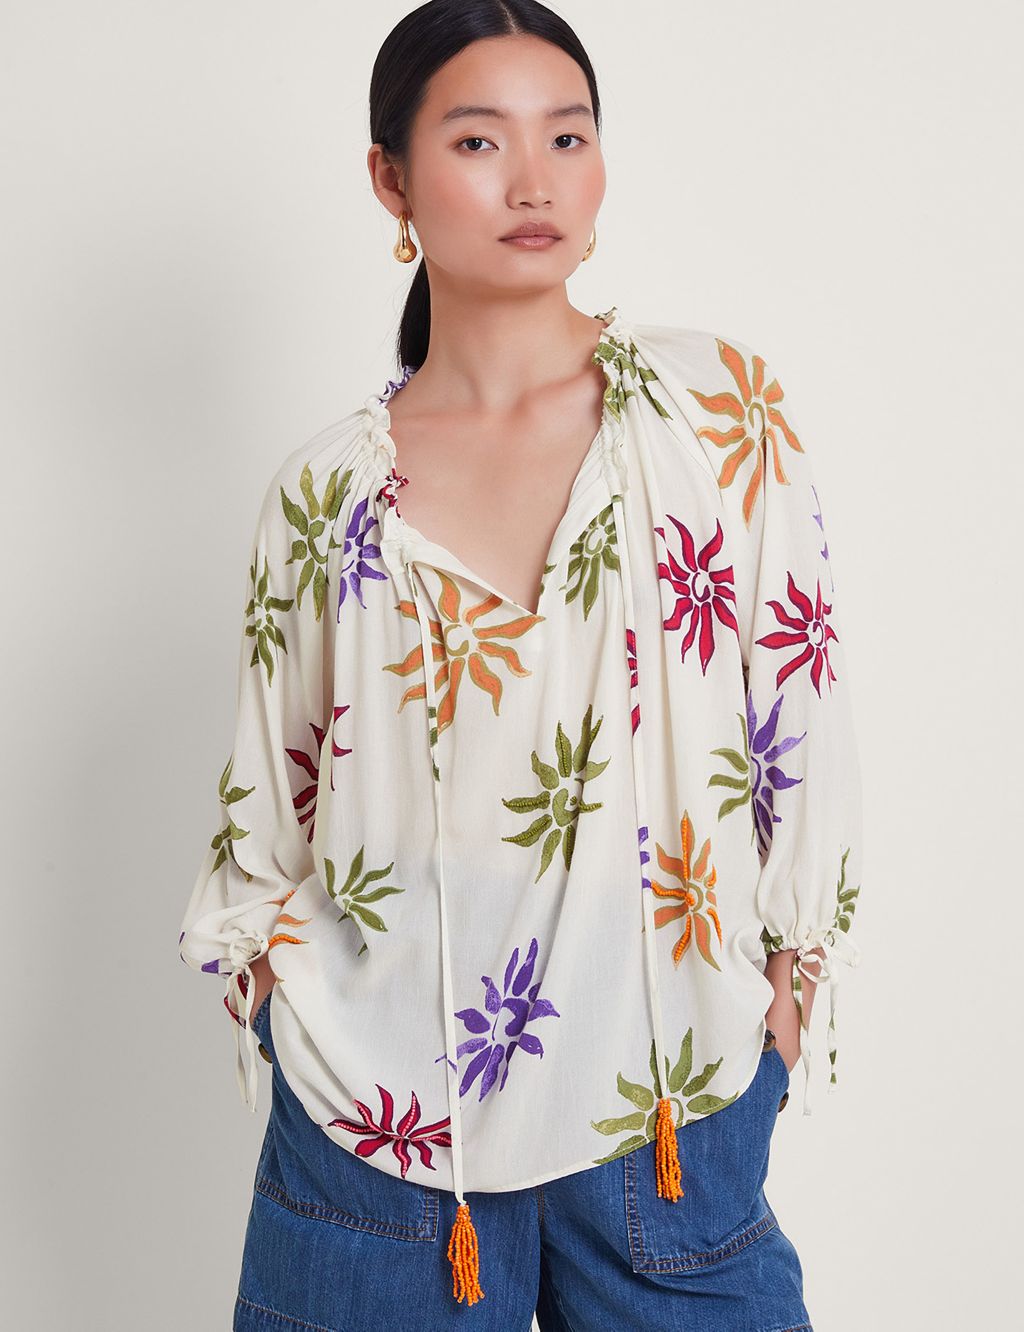 Embroidered Floral Tie Neck Tassel Blouse